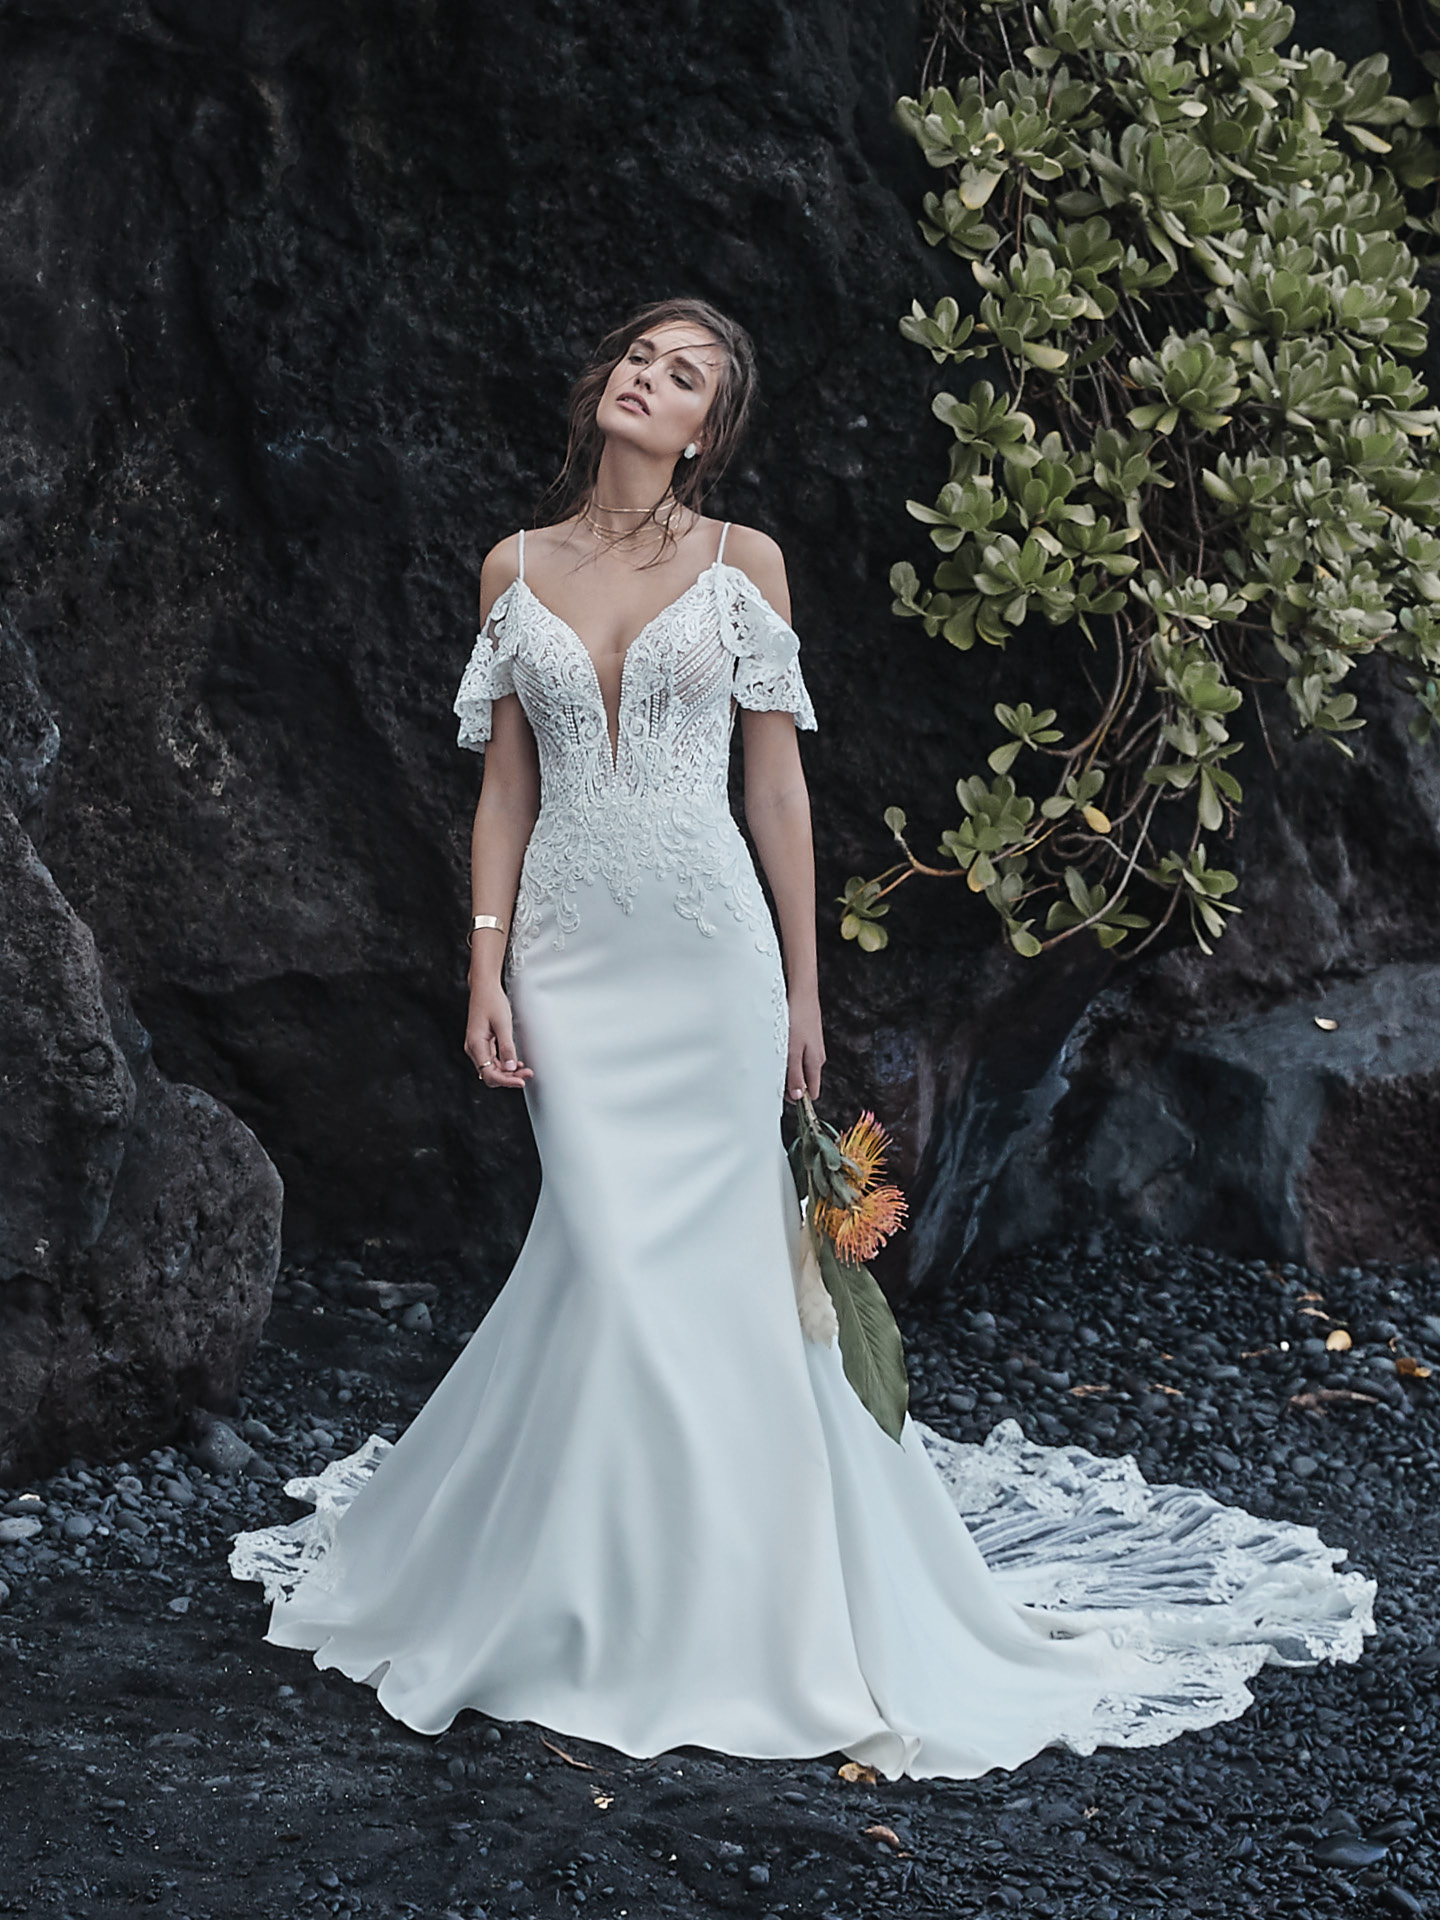 Bride Wearing Customized Wedding Dress With Detachable Off-The-Shoulder Sleeves Called Bracken By Sottero And Midgley